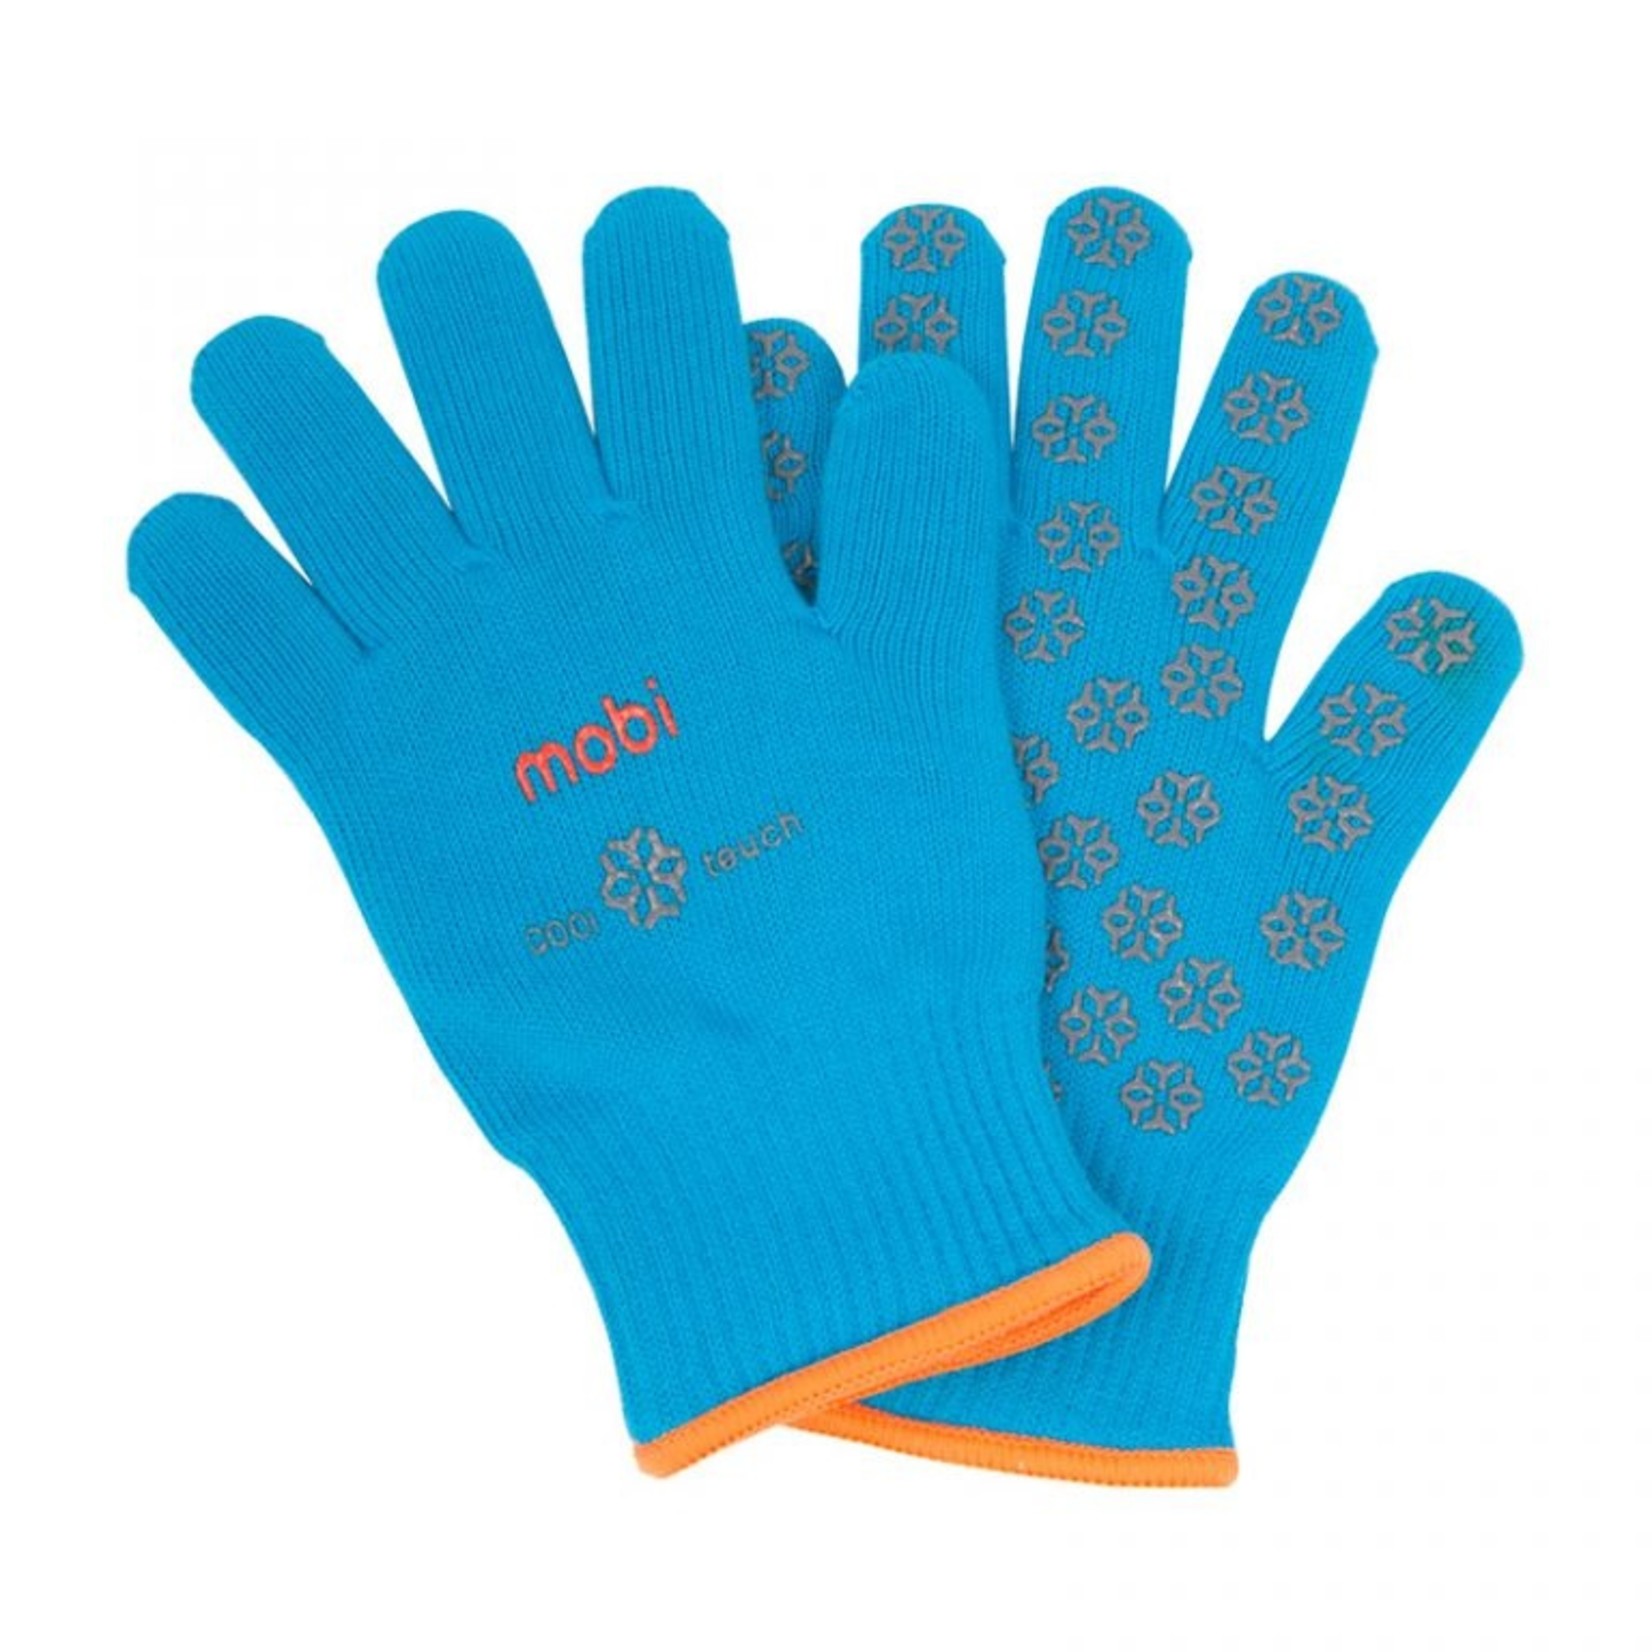 Mobi Cool Touch Oven Glove